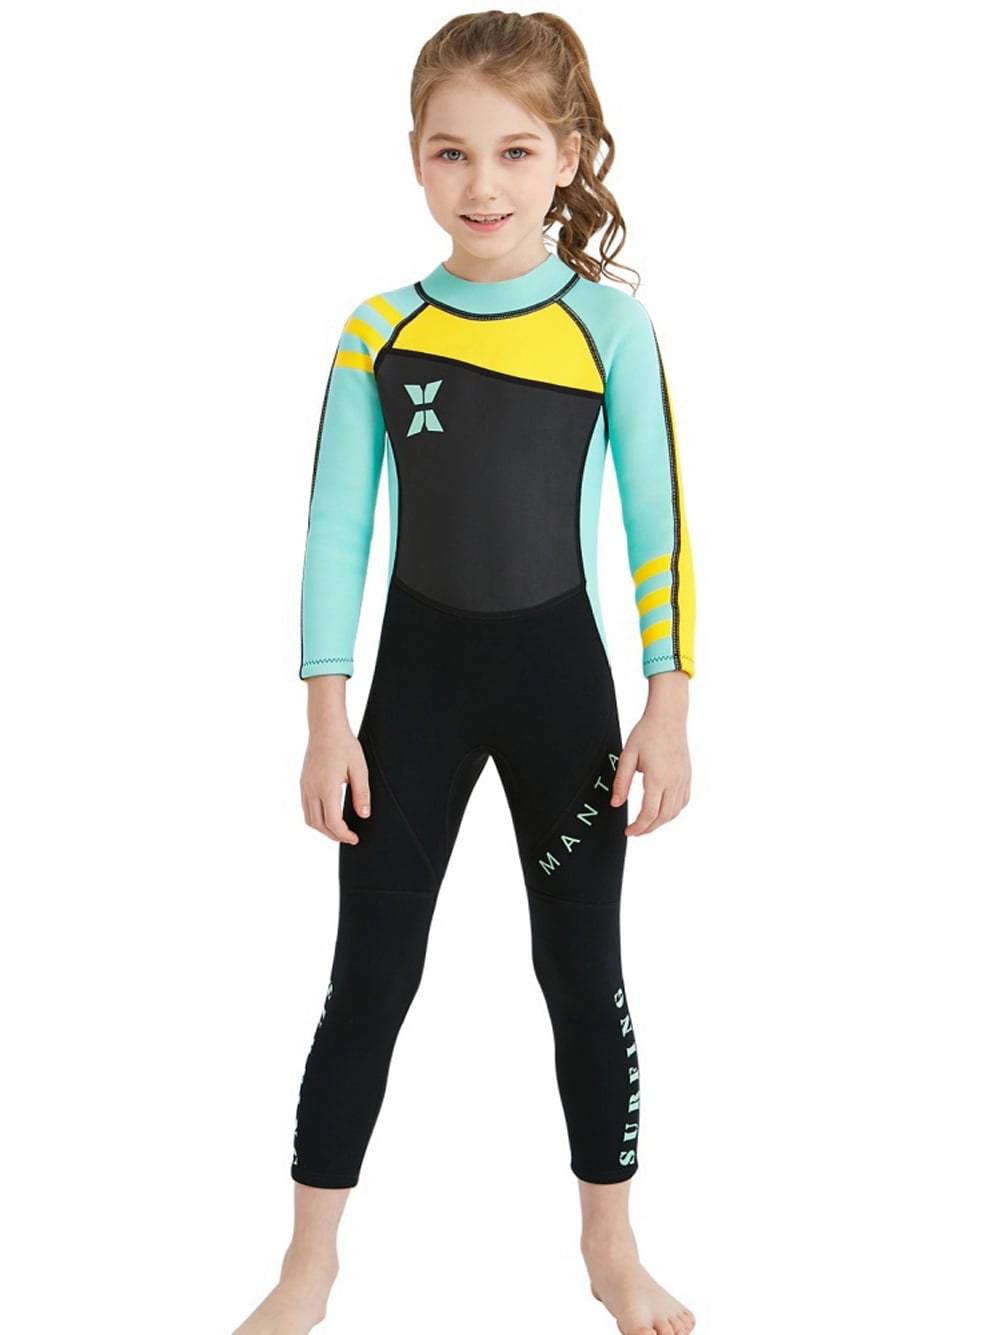 CtriLady Kids Wetsuit Shorty for Boys Girls 1.5mm Neoprene Thermal Swimsuit Warm Full Long Sleeve Wet Suits for Toddler Child Junior Youth Swimming Diving Surfing 